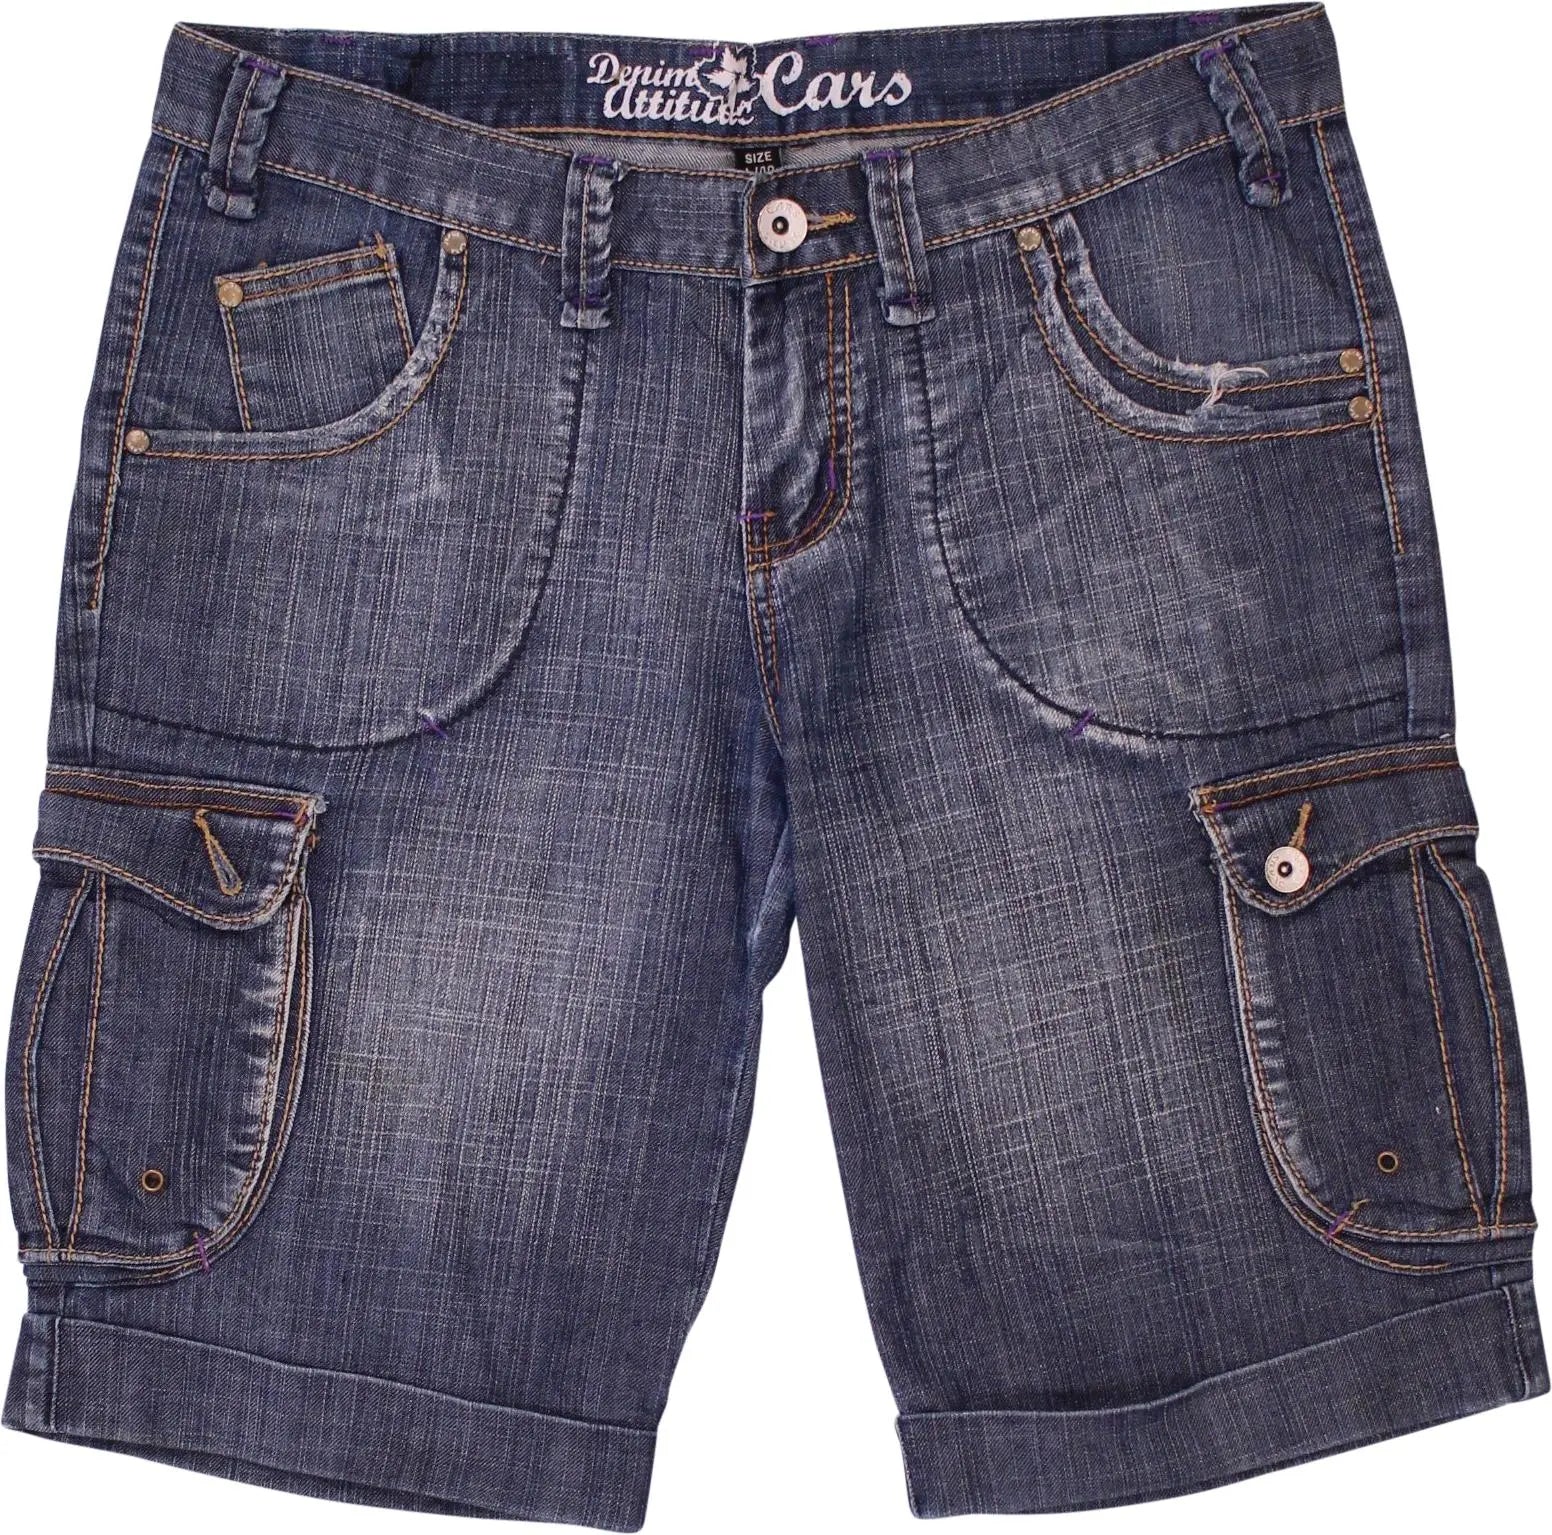 Cars Jeans - Denim Shorts- ThriftTale.com - Vintage and second handclothing